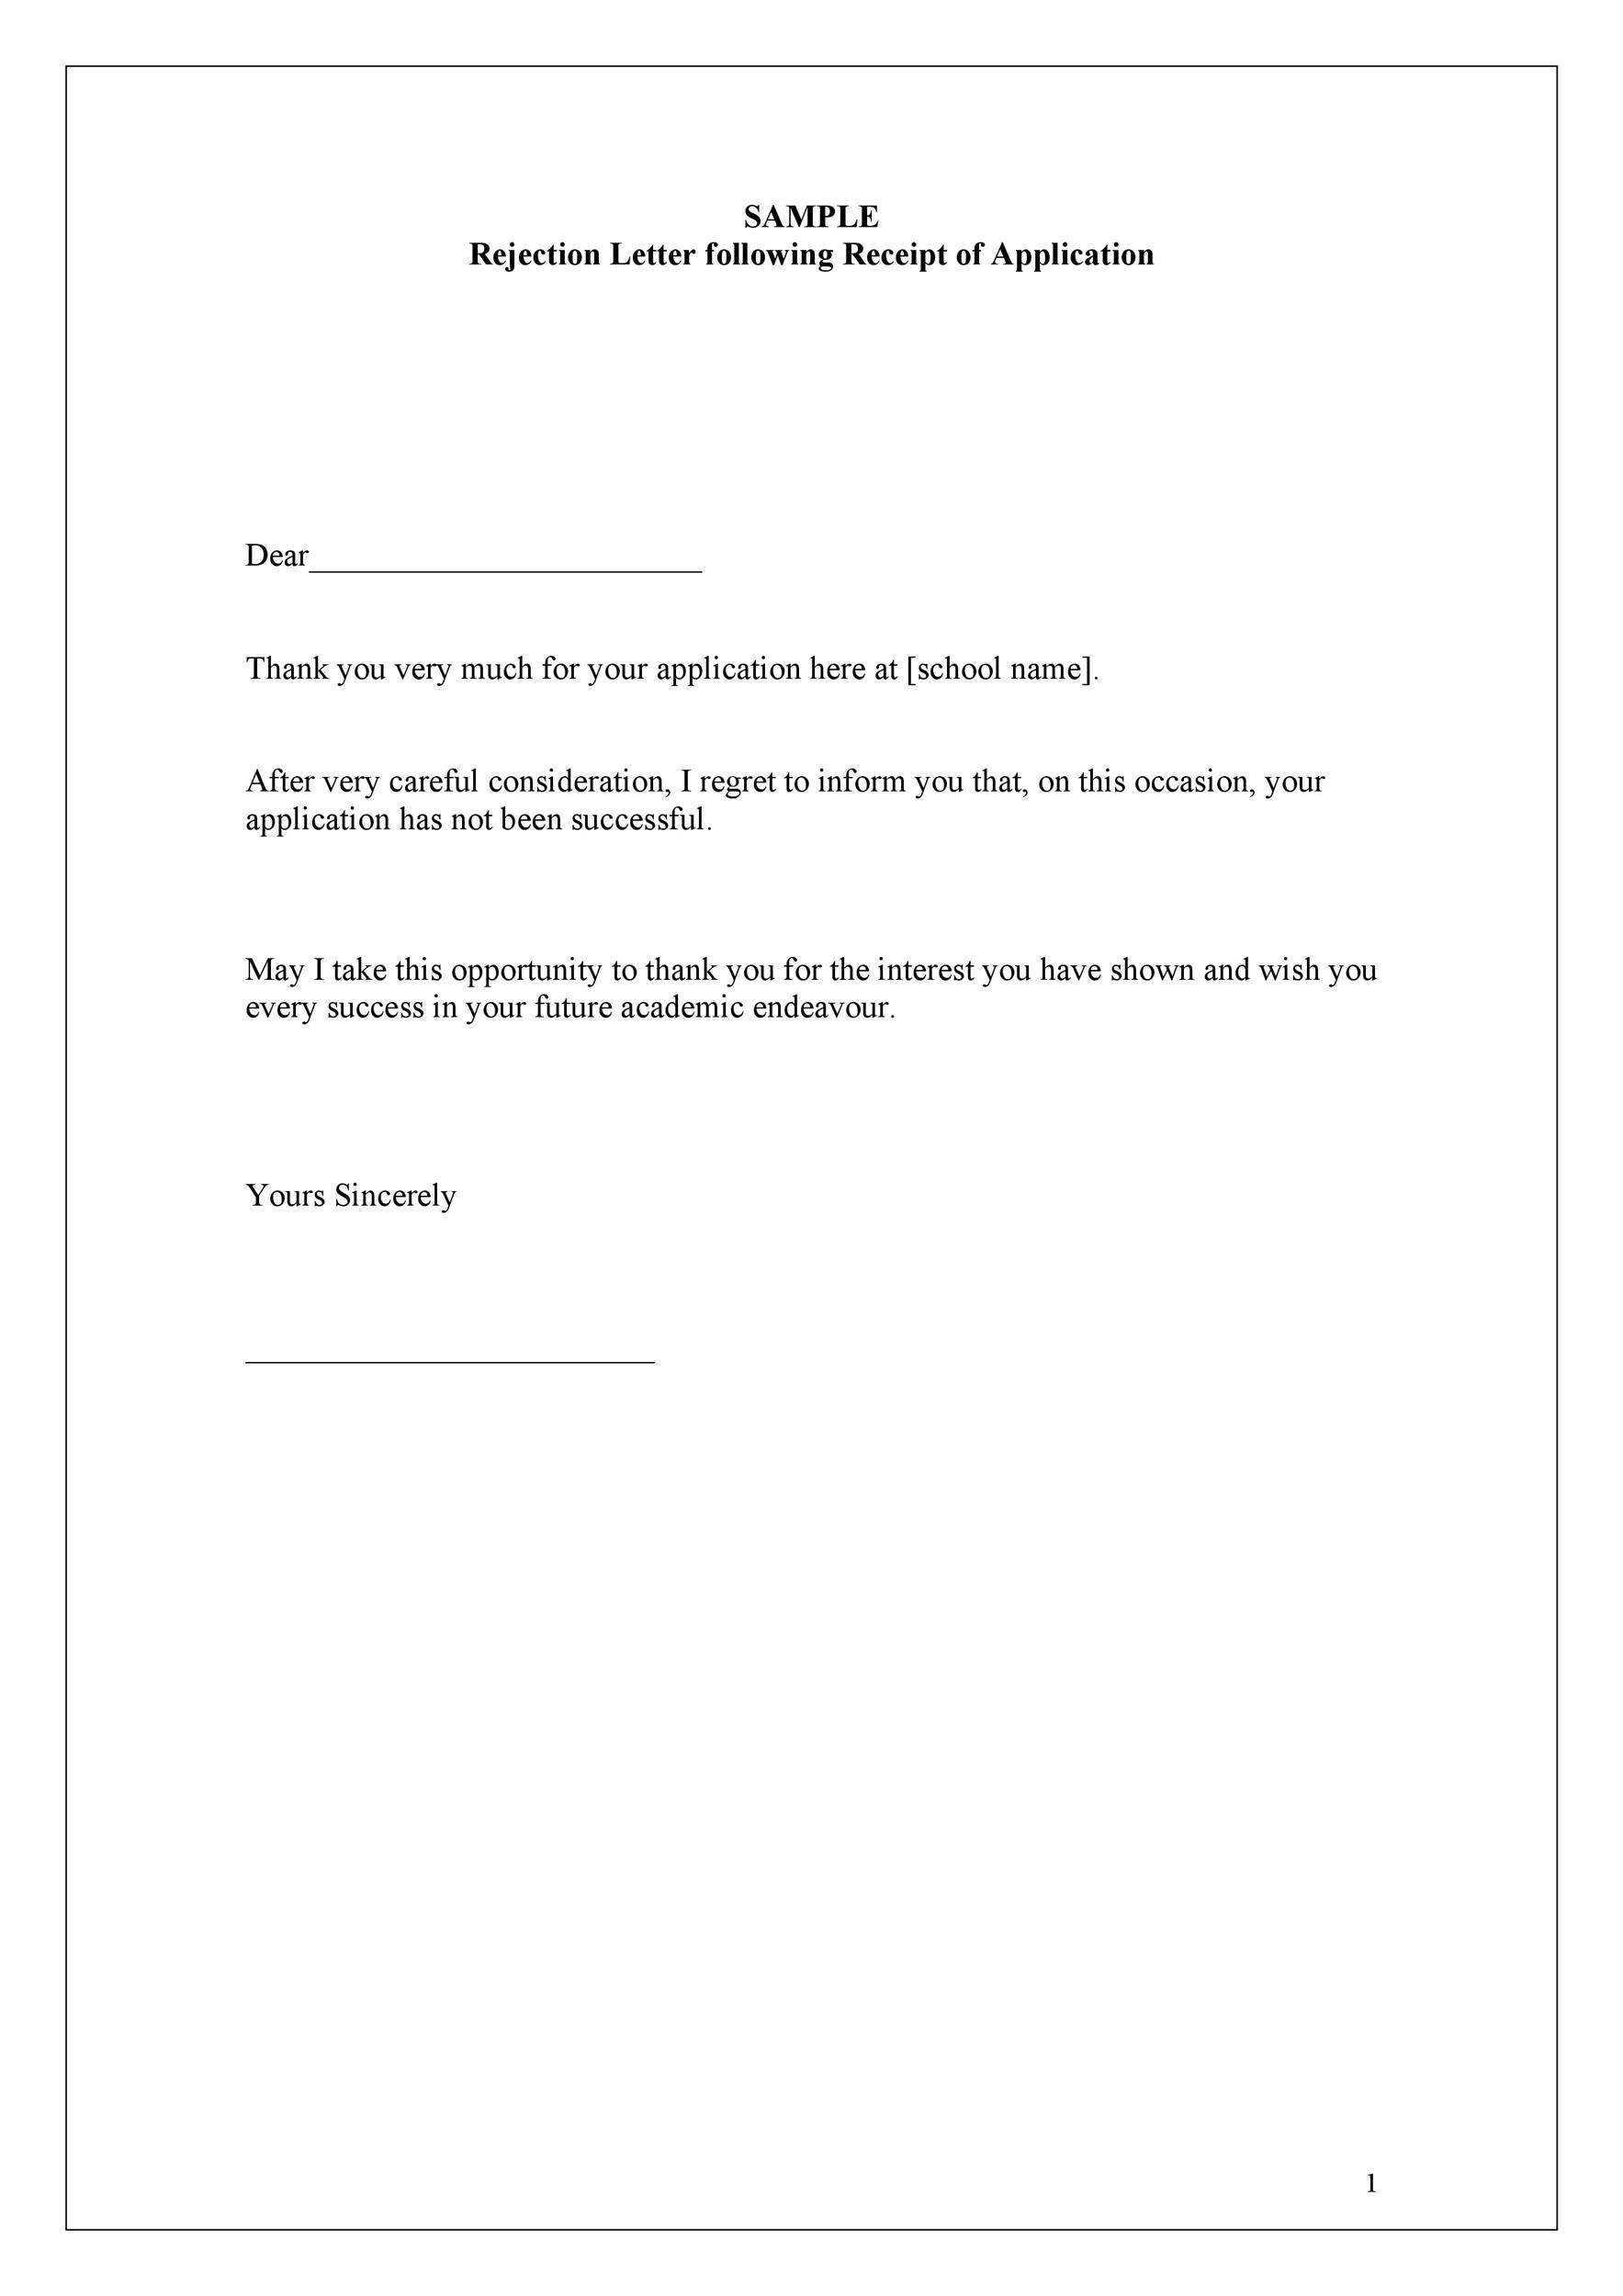 34 College Rejection Letter Samples ( Examples) ᐅ TemplateLab